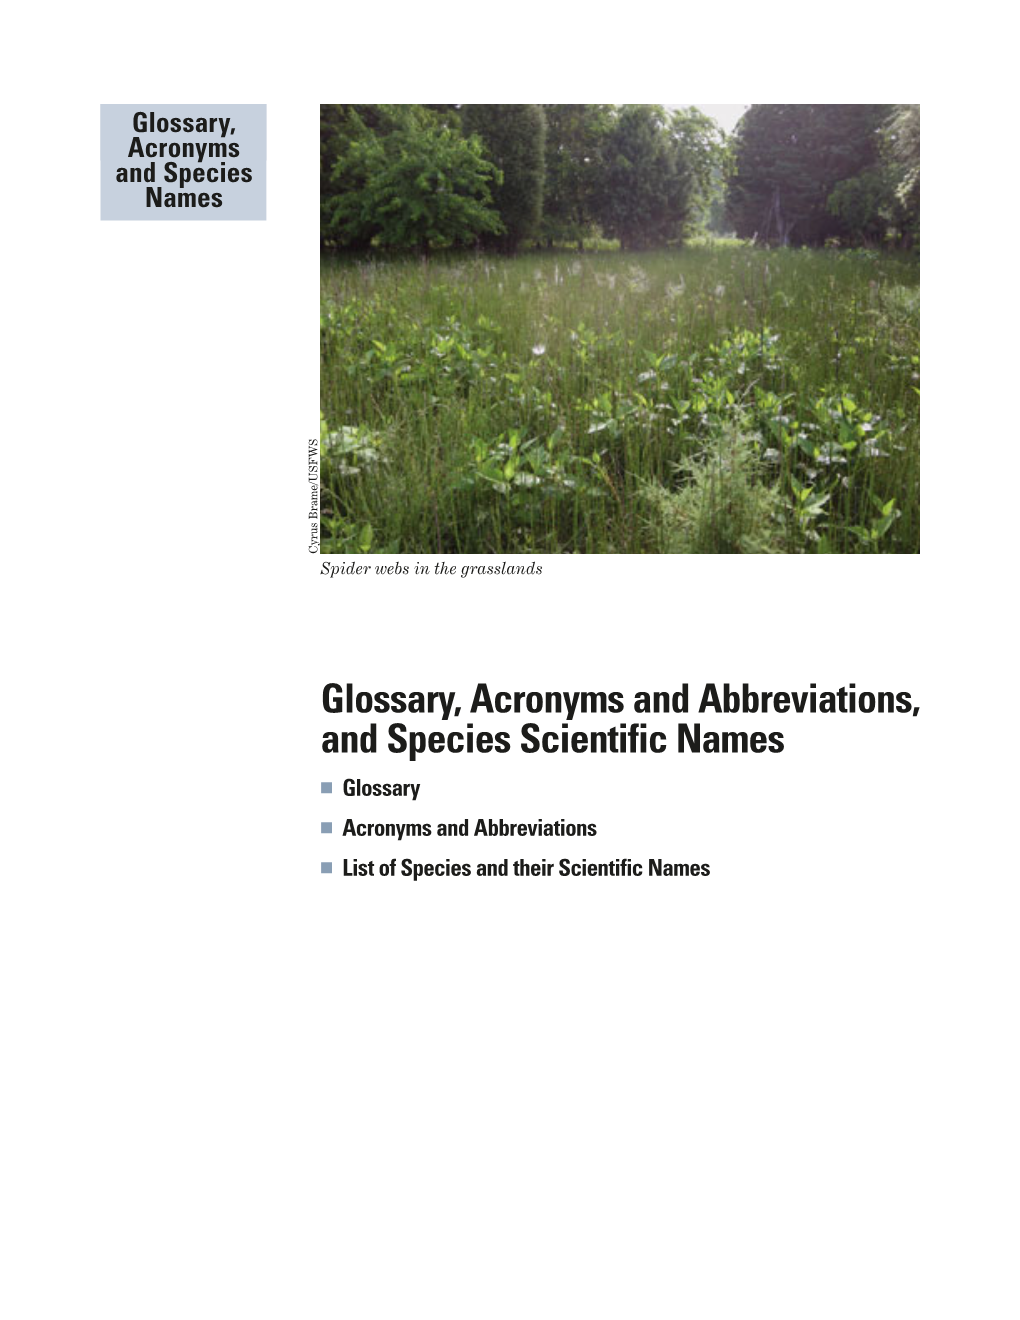 Glossary, Acronyms, and Species Scientific Names